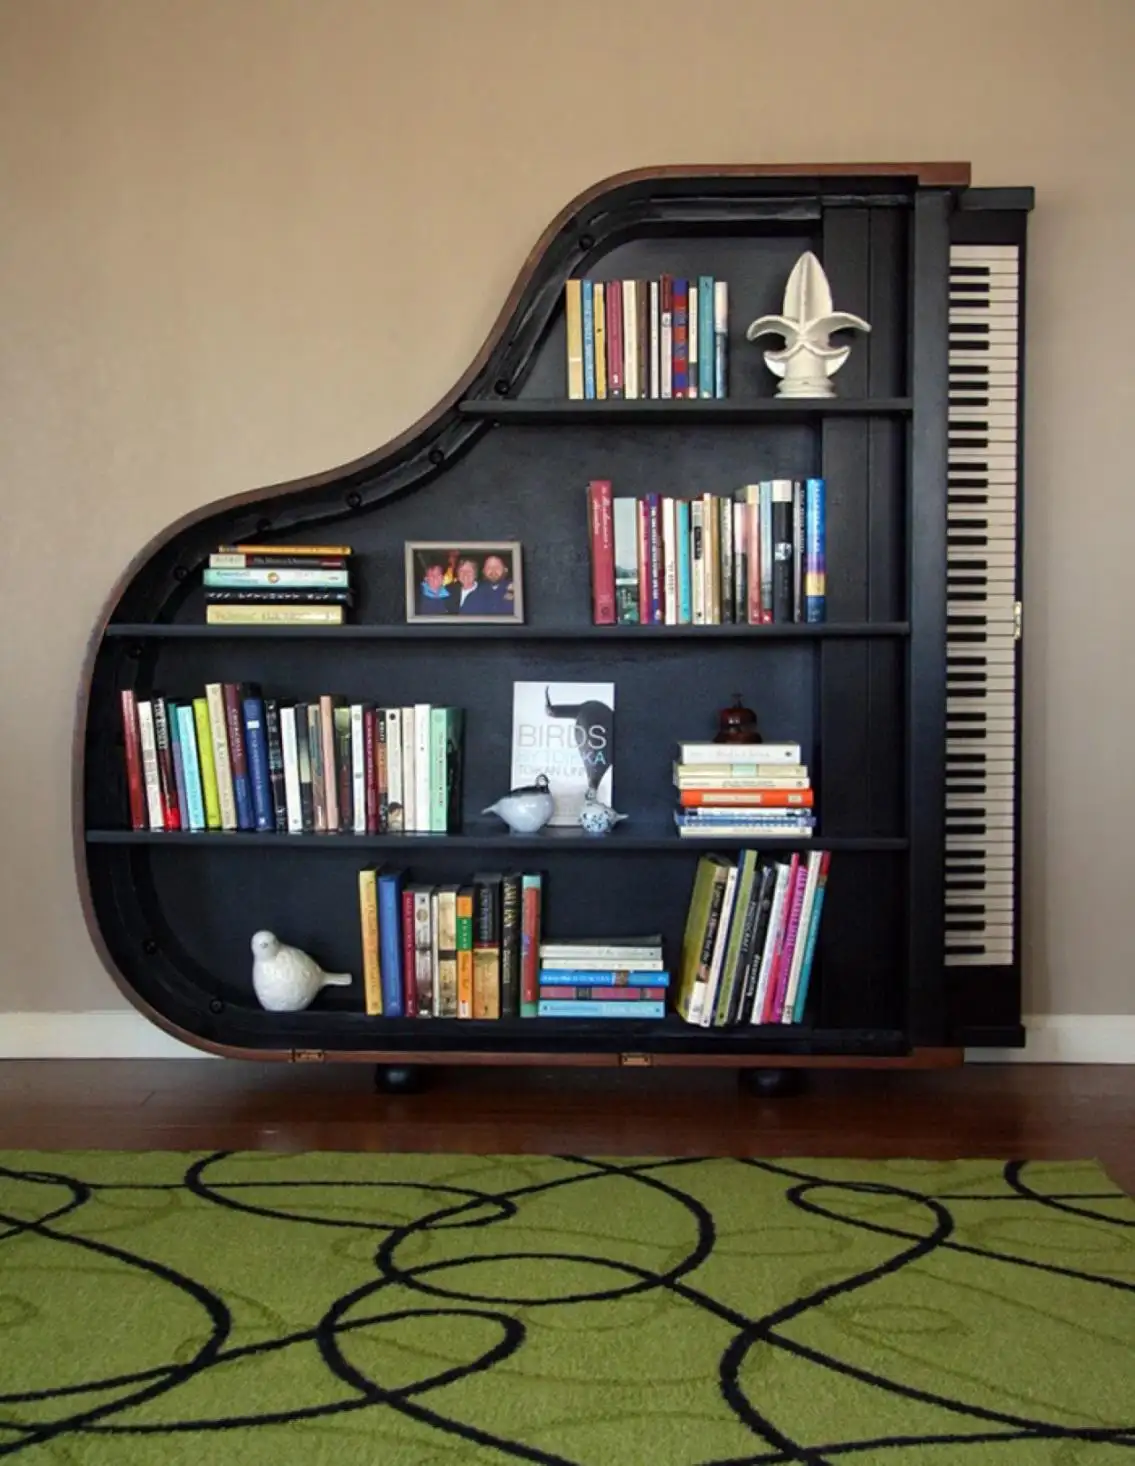 Making musical instruments become part of the interior design